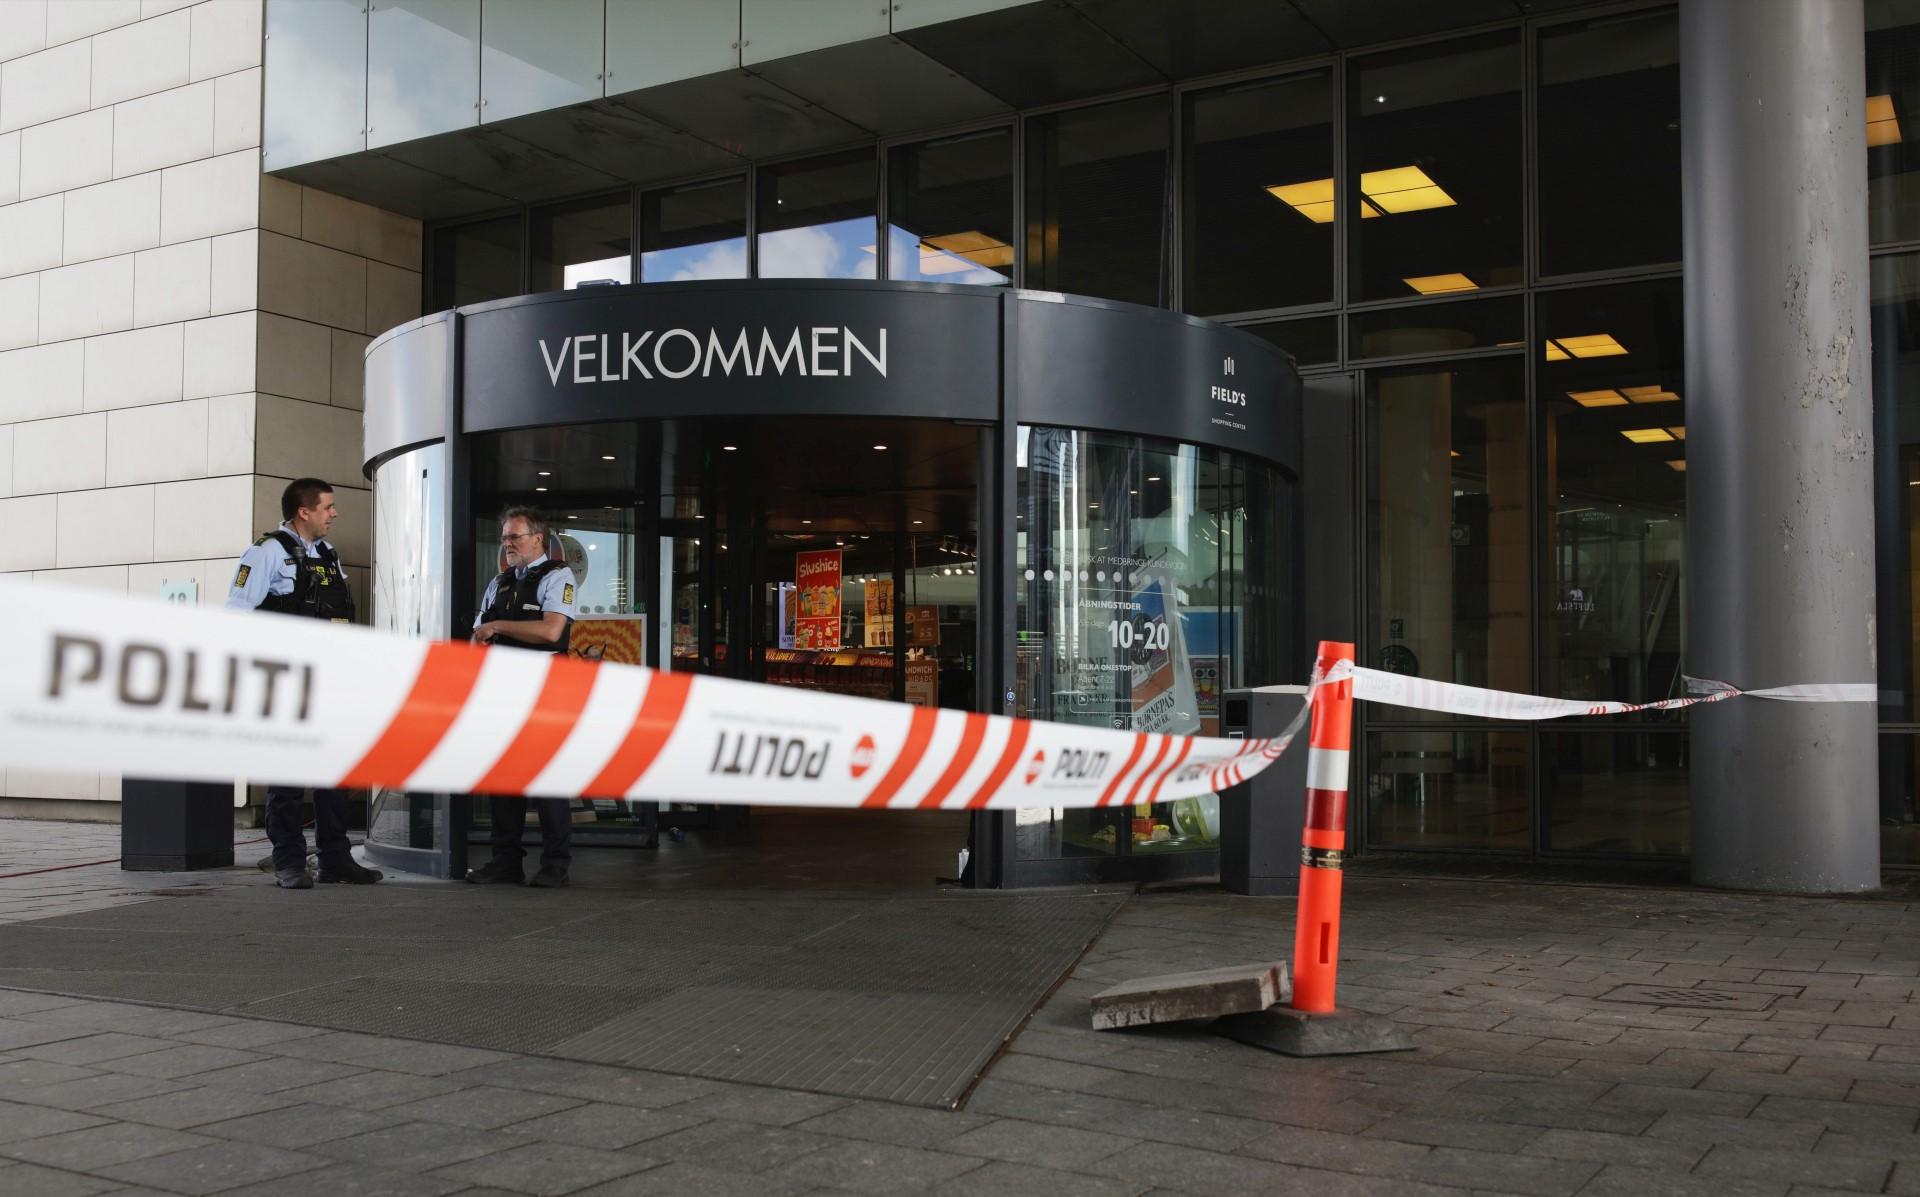 One of the entrances of the Fields shopping mall is cordoned off as police forces stand guard on the site one day after a deadly shooting on July 4, in Copenhagen. Photo: AFP